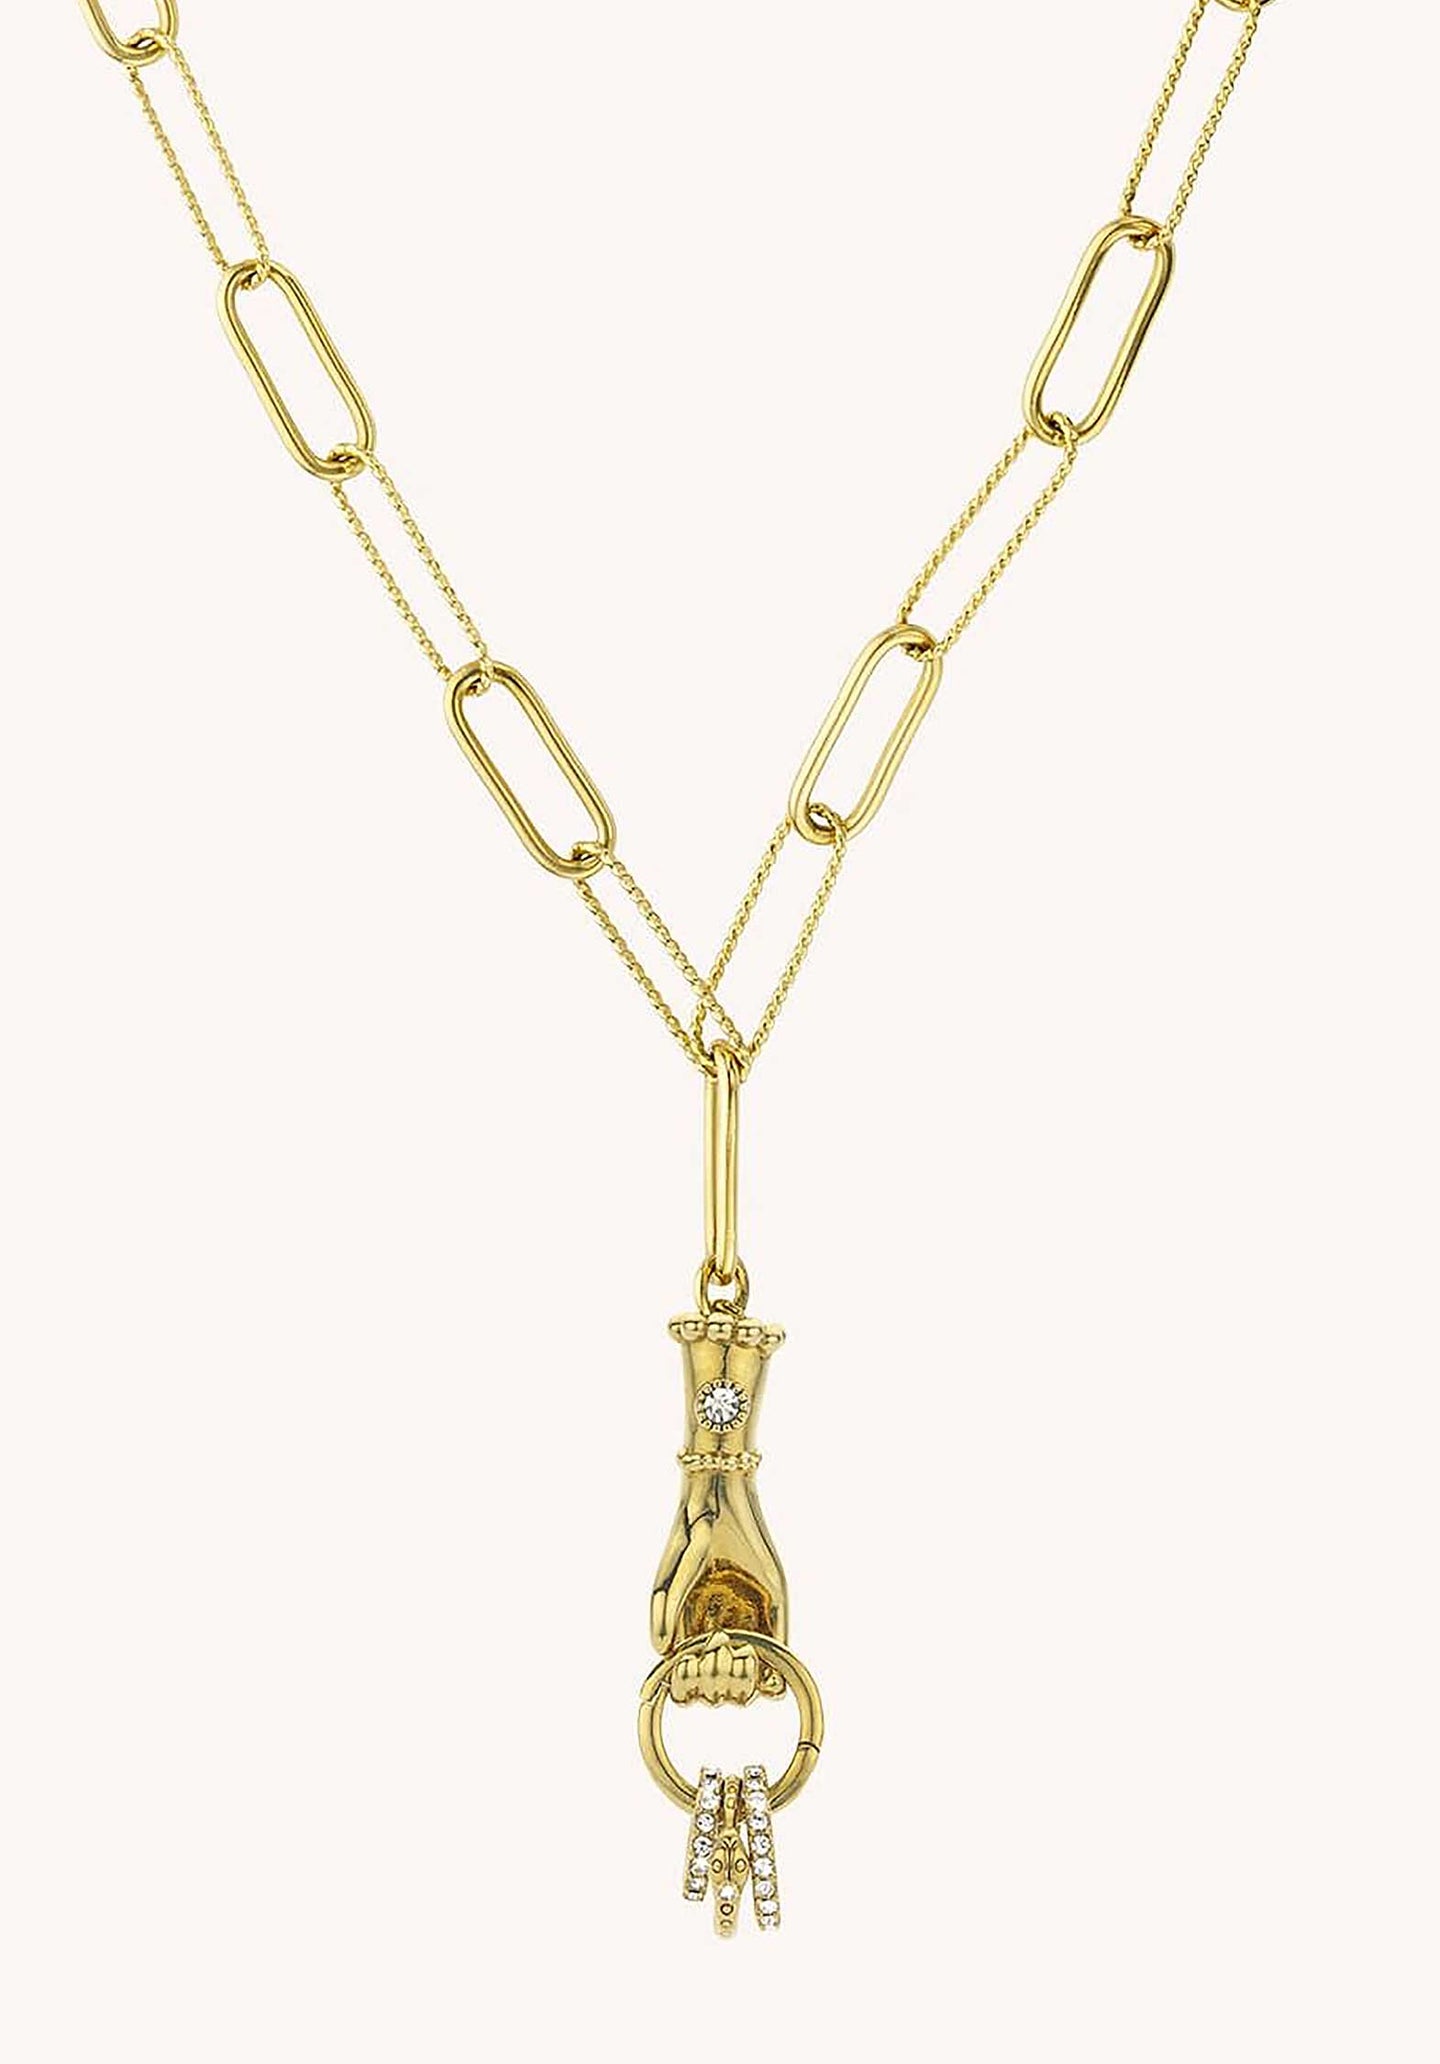 Necklace Co-211g Gold